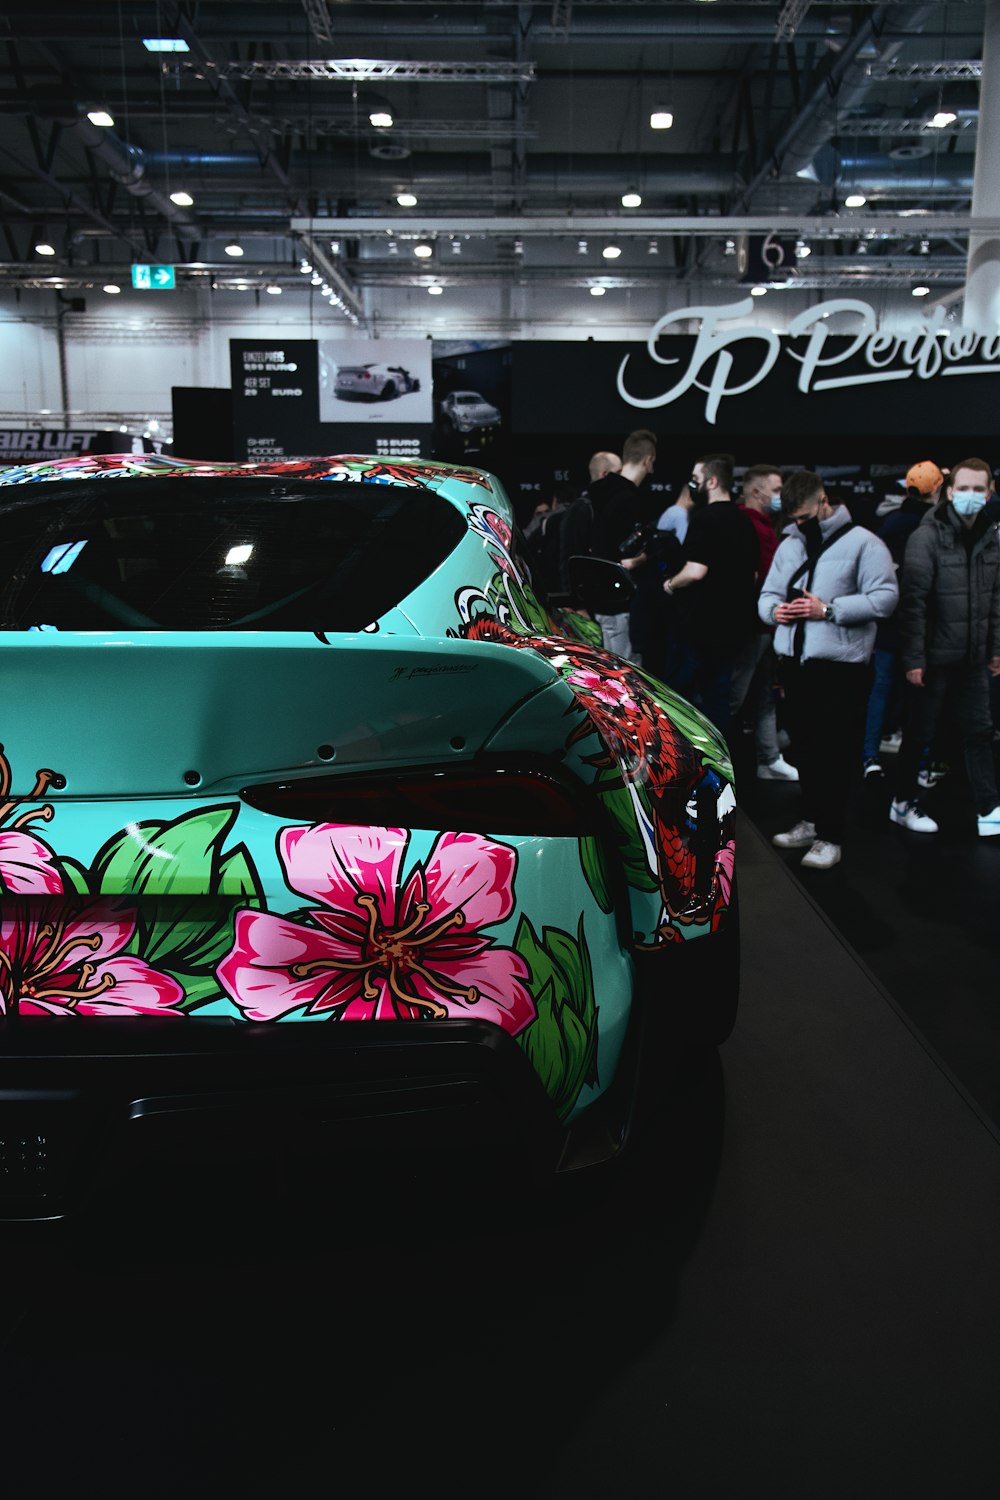 a green sports car with flowers painted on it